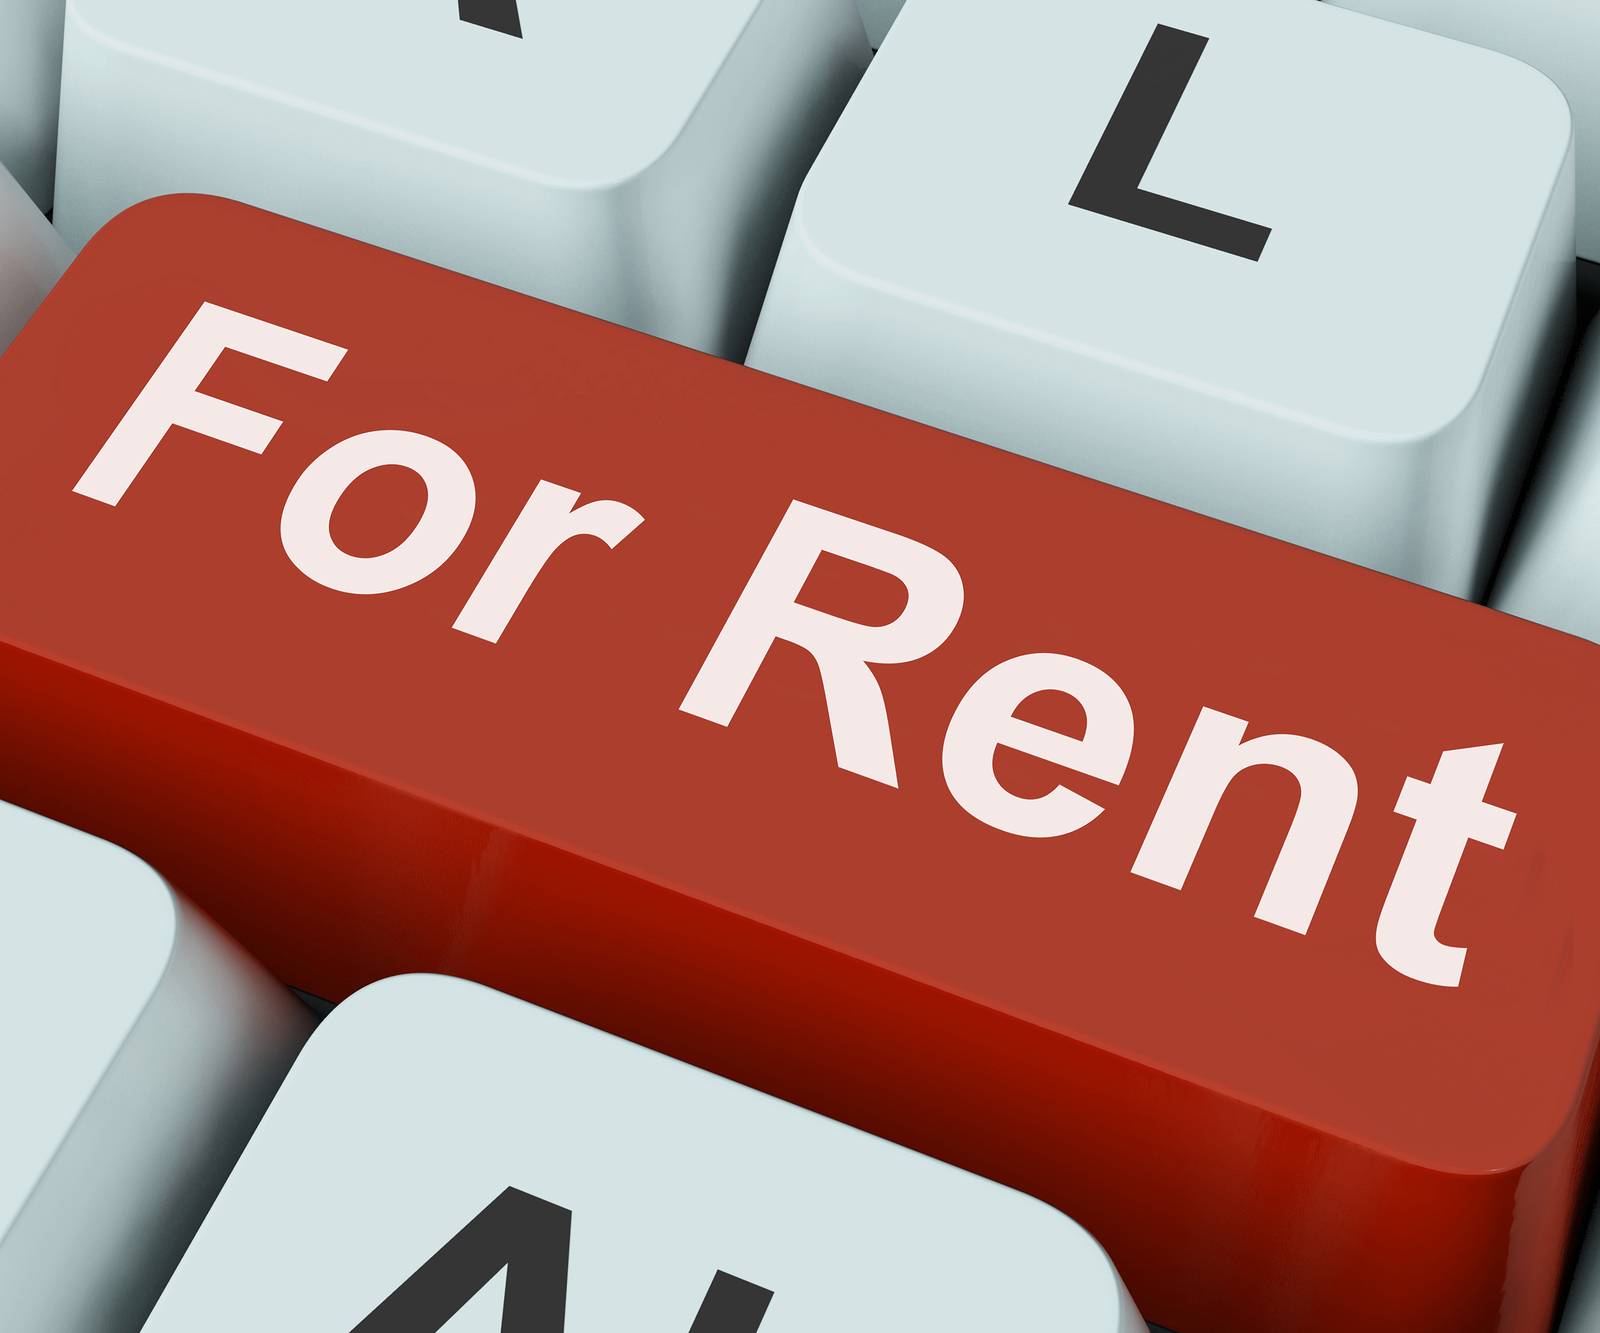 bigstock-For-Rent-Key-Means-Lease-Or-Re-51988990.jpg